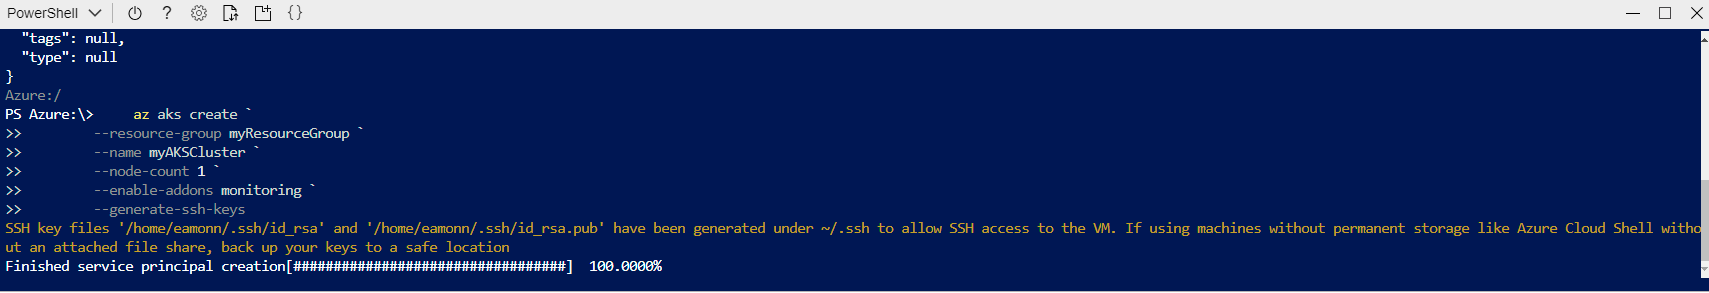 Screenshot of the Azure Cloud Shell with the azure cli command to create a cluster running